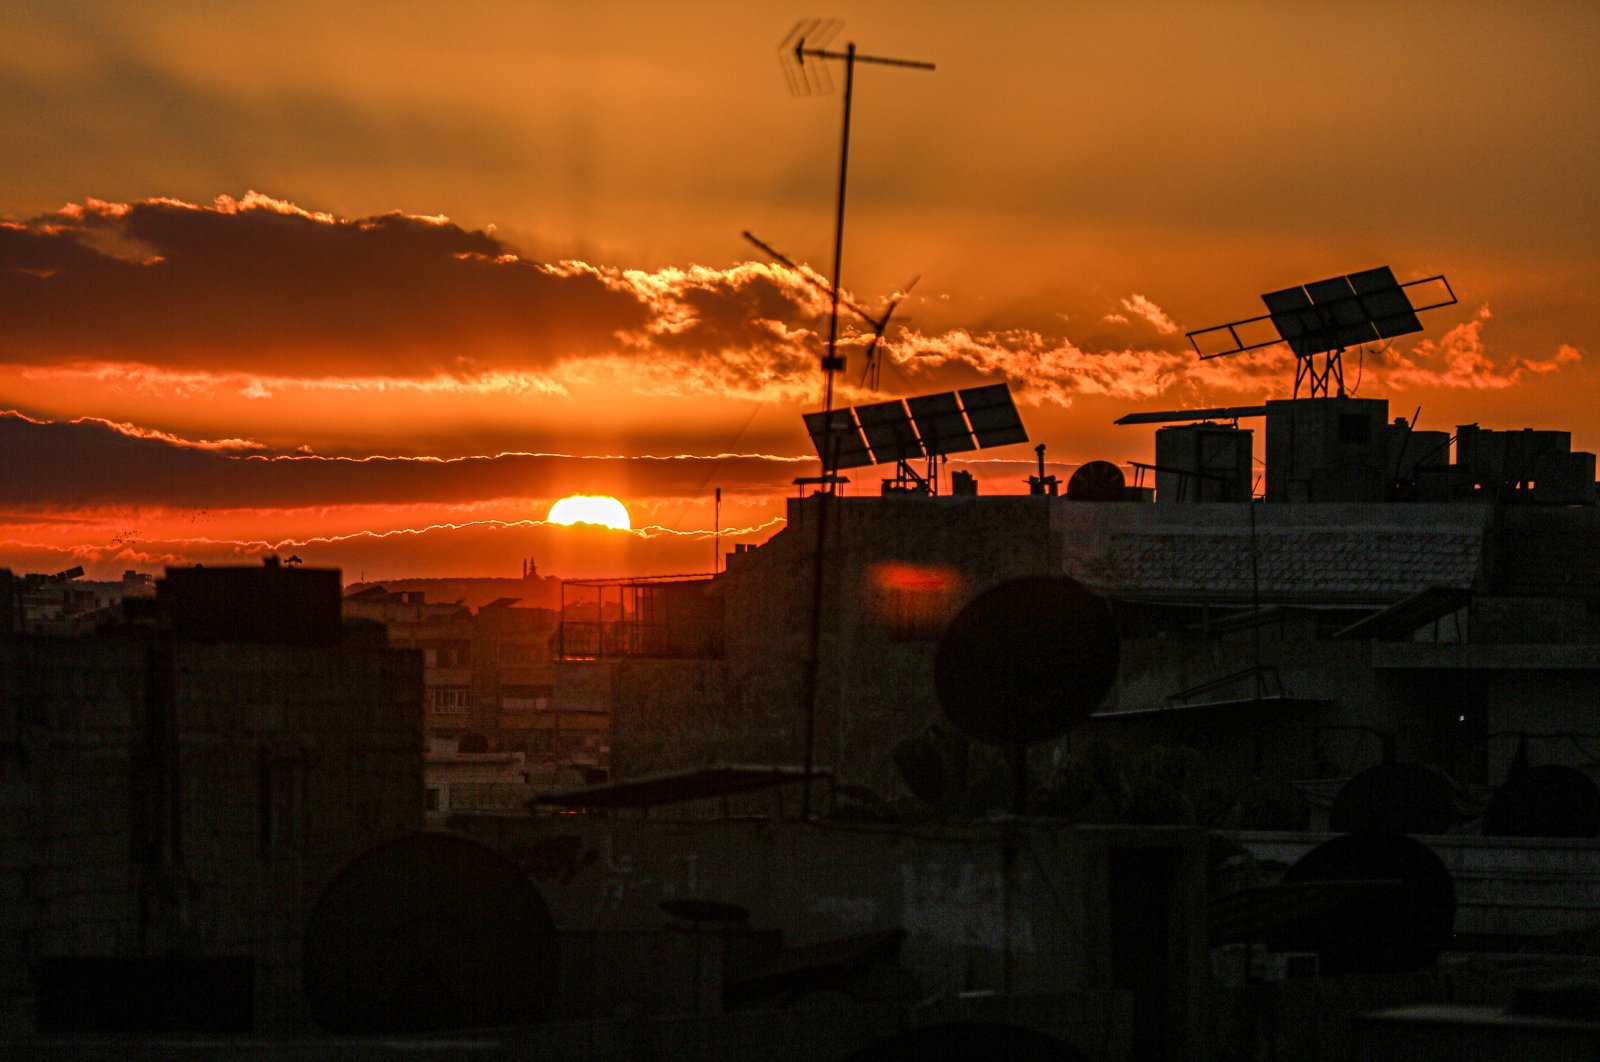 A sunset seen over the Idlib province, northern Syria, Feb. 15, 2021. (Photo by Getty Images)